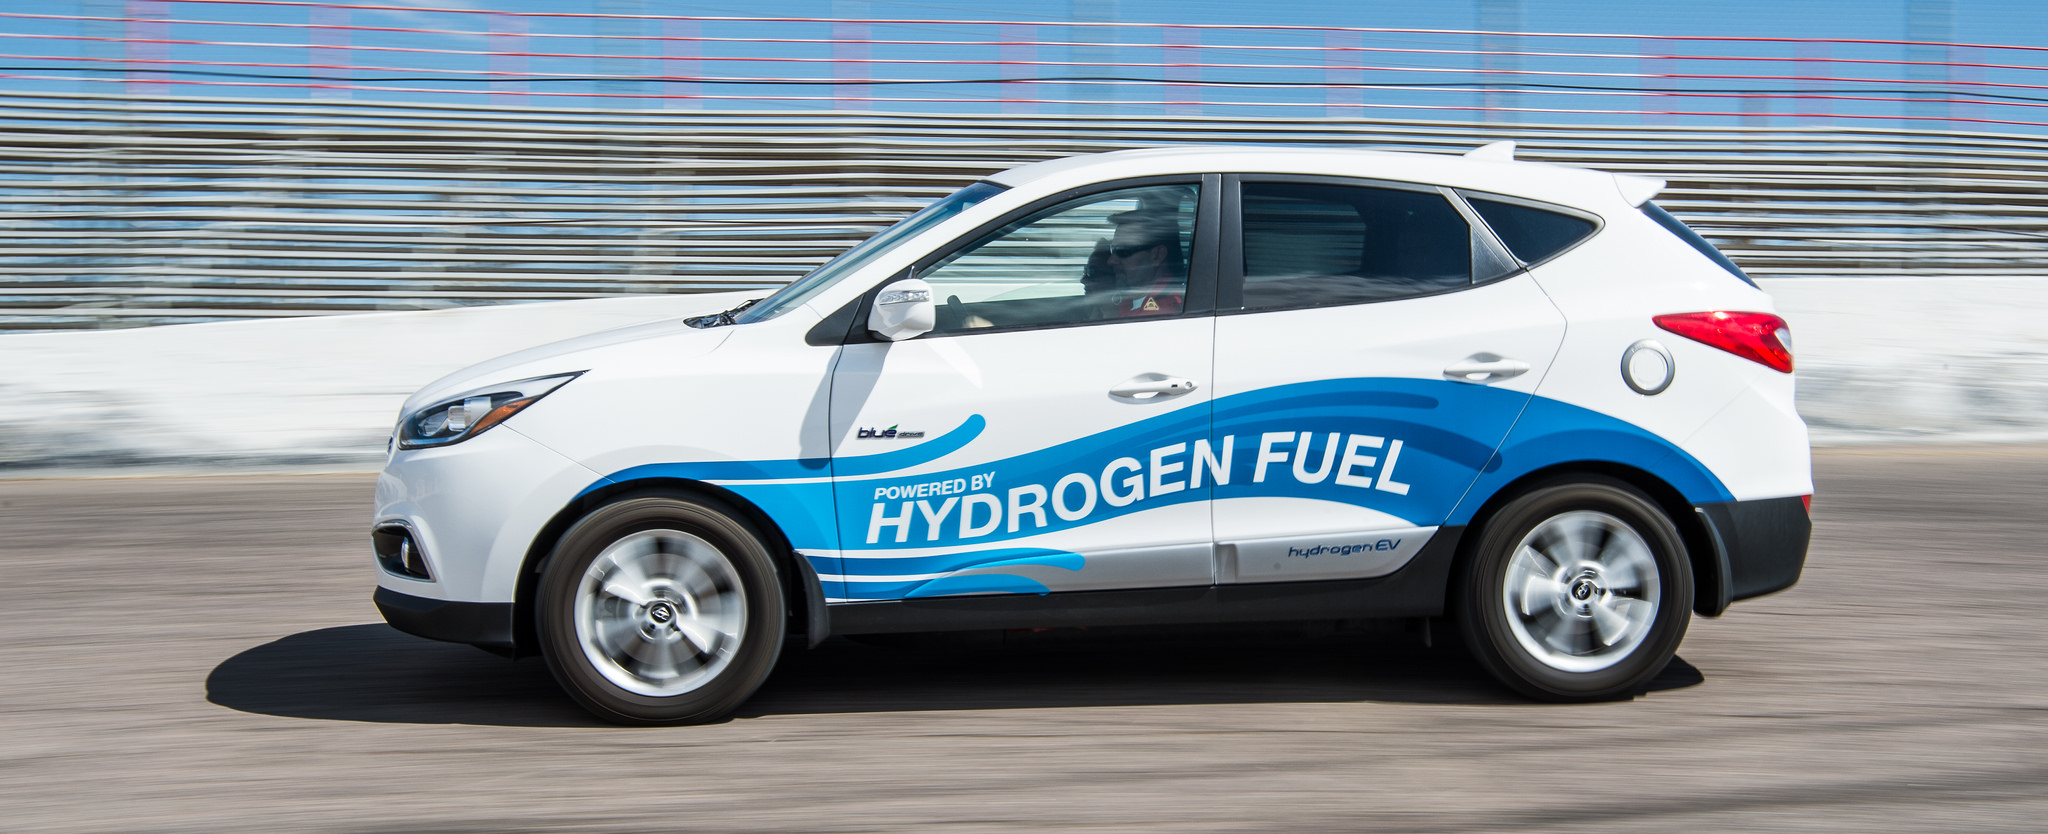 584 Hydrogen Fueling Stations Launched in 33 Countries